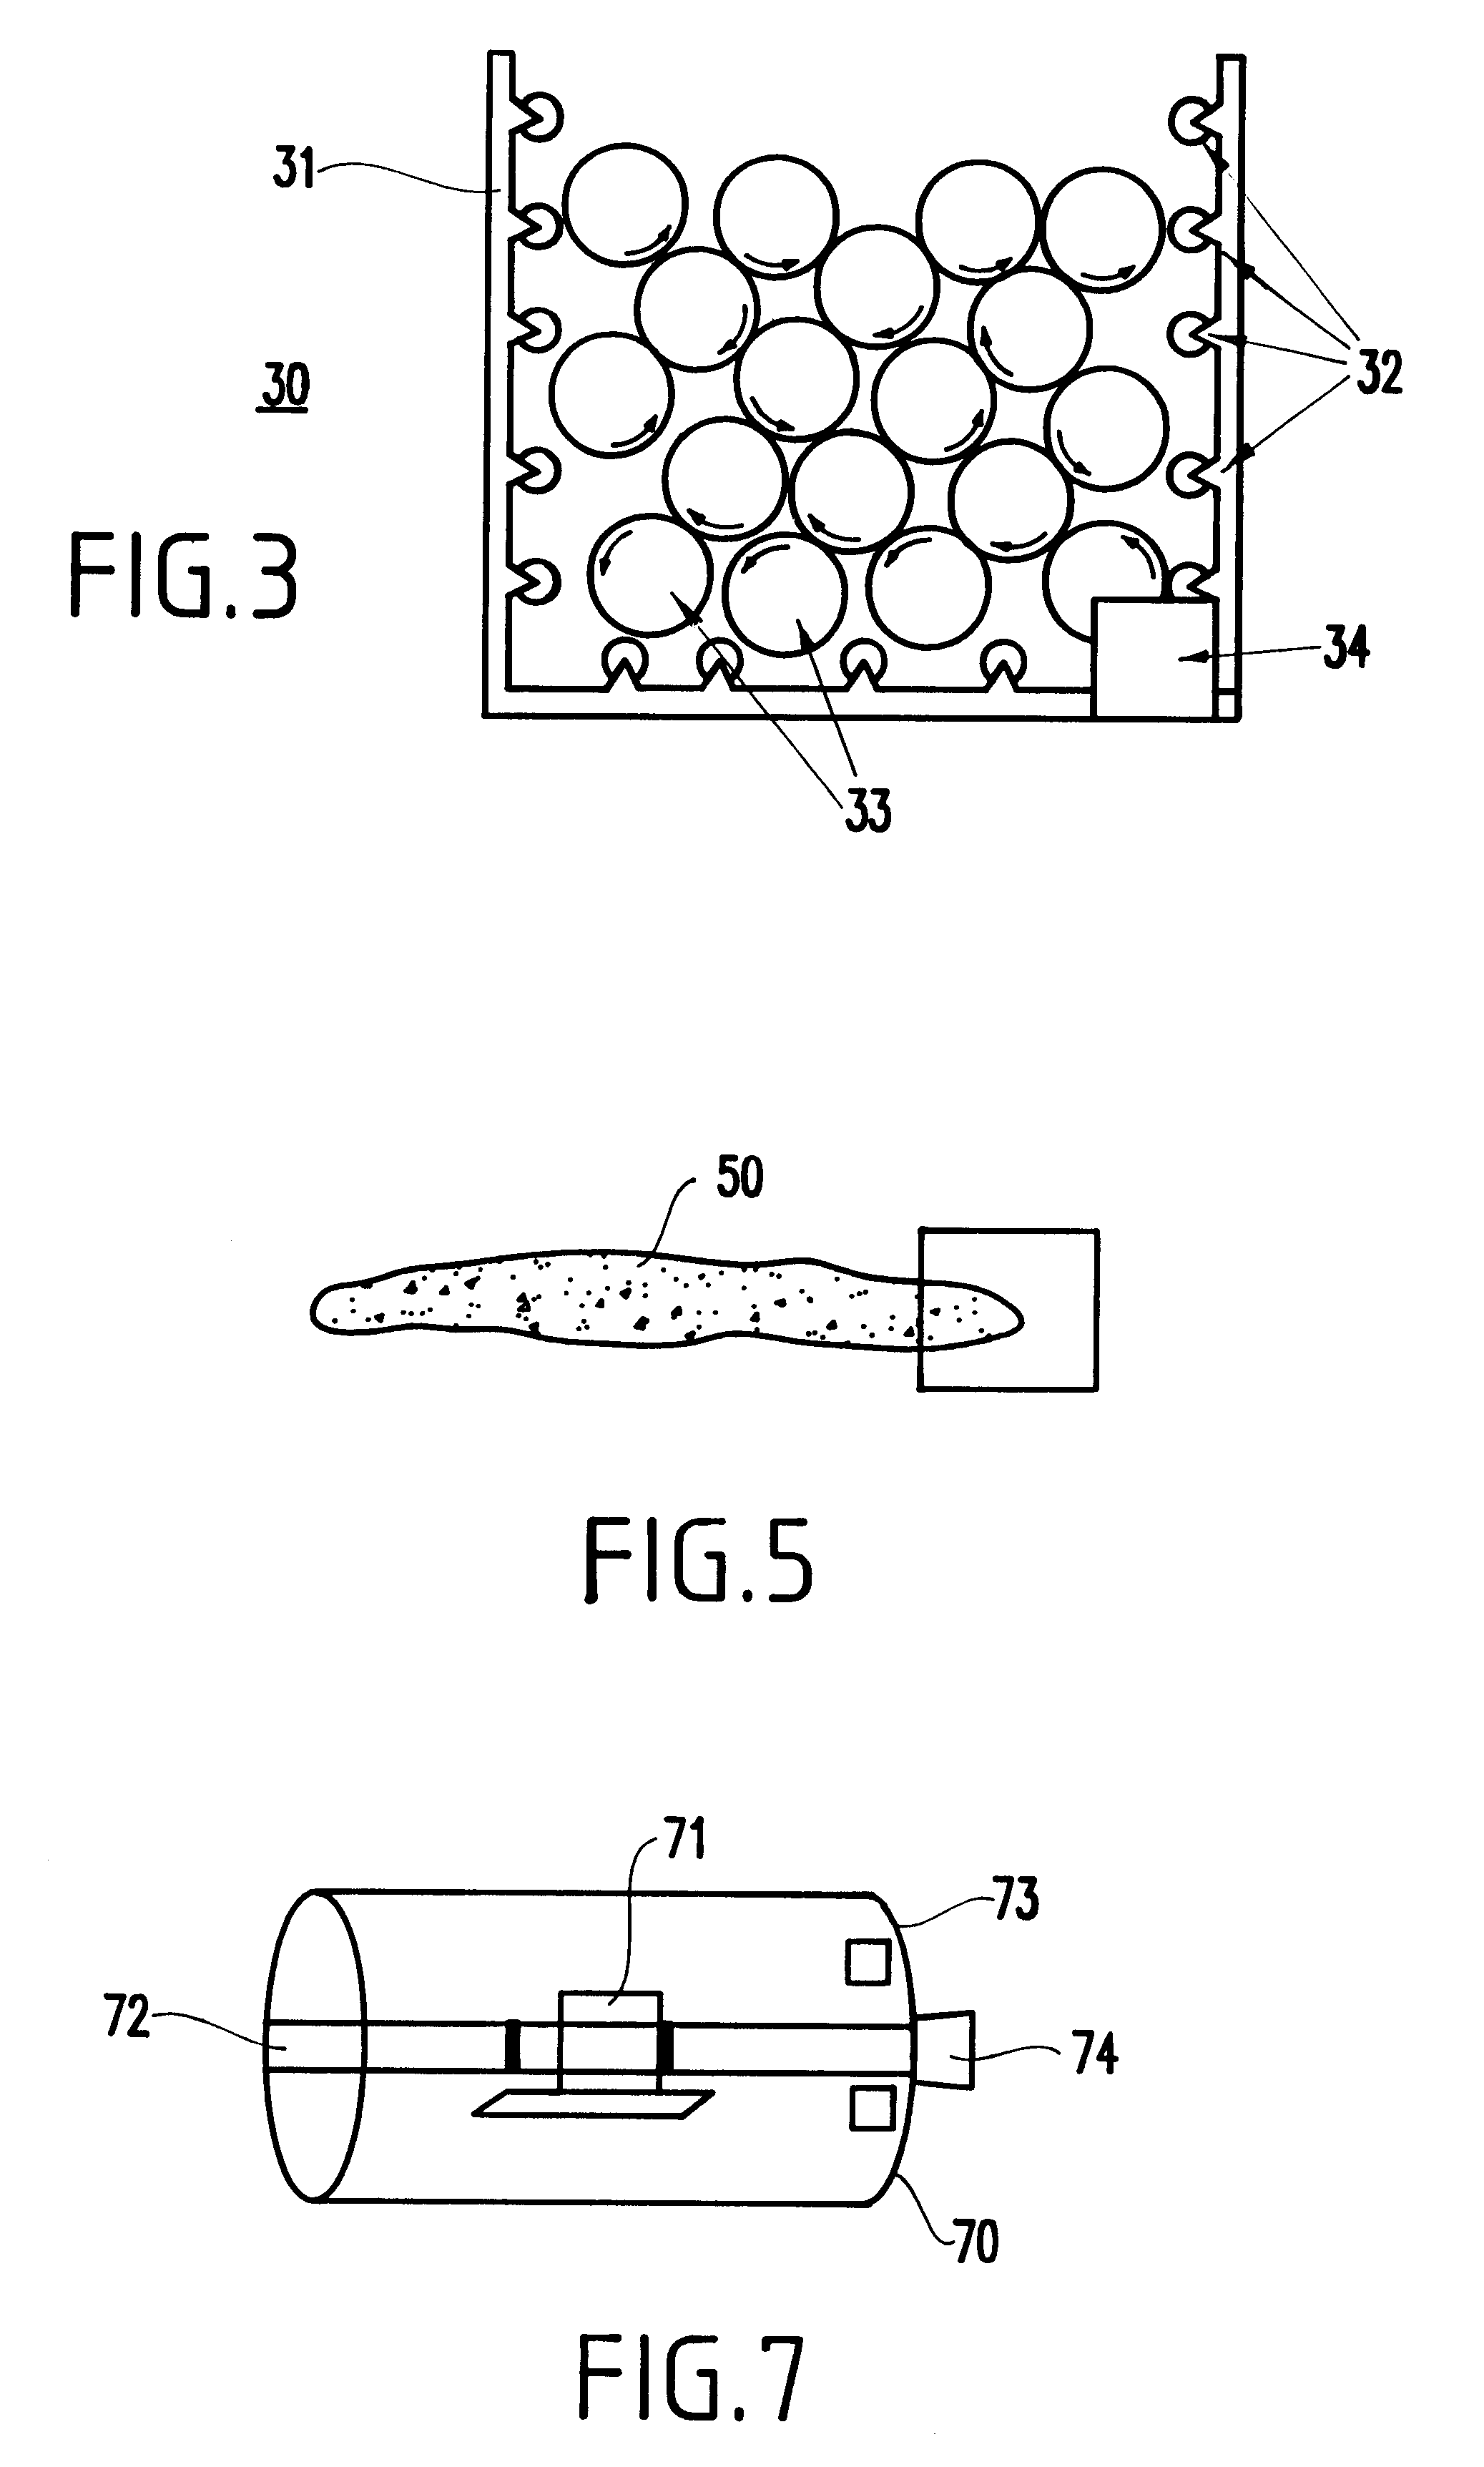 Apparatus for storing containers of mixtures for preventing separation or crystallization thereof